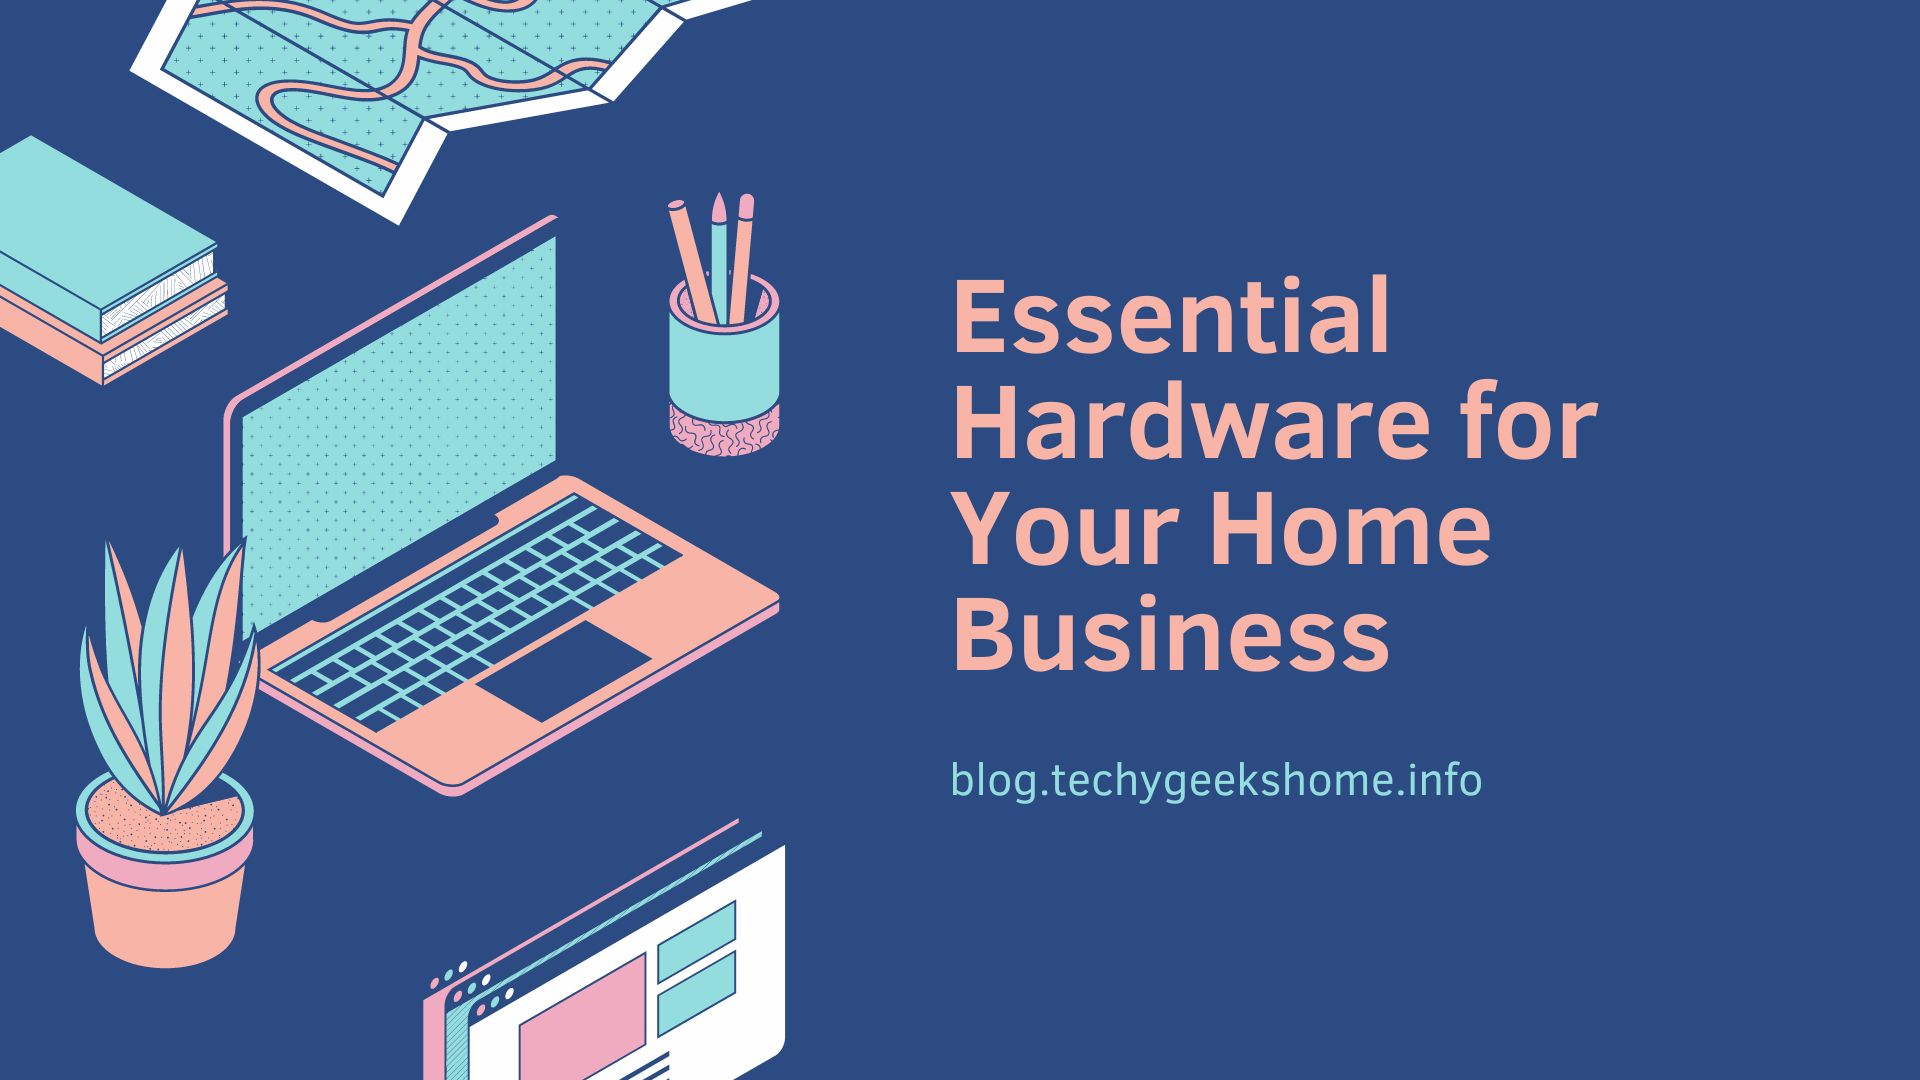 Essential Hardware for Your Home Business 21